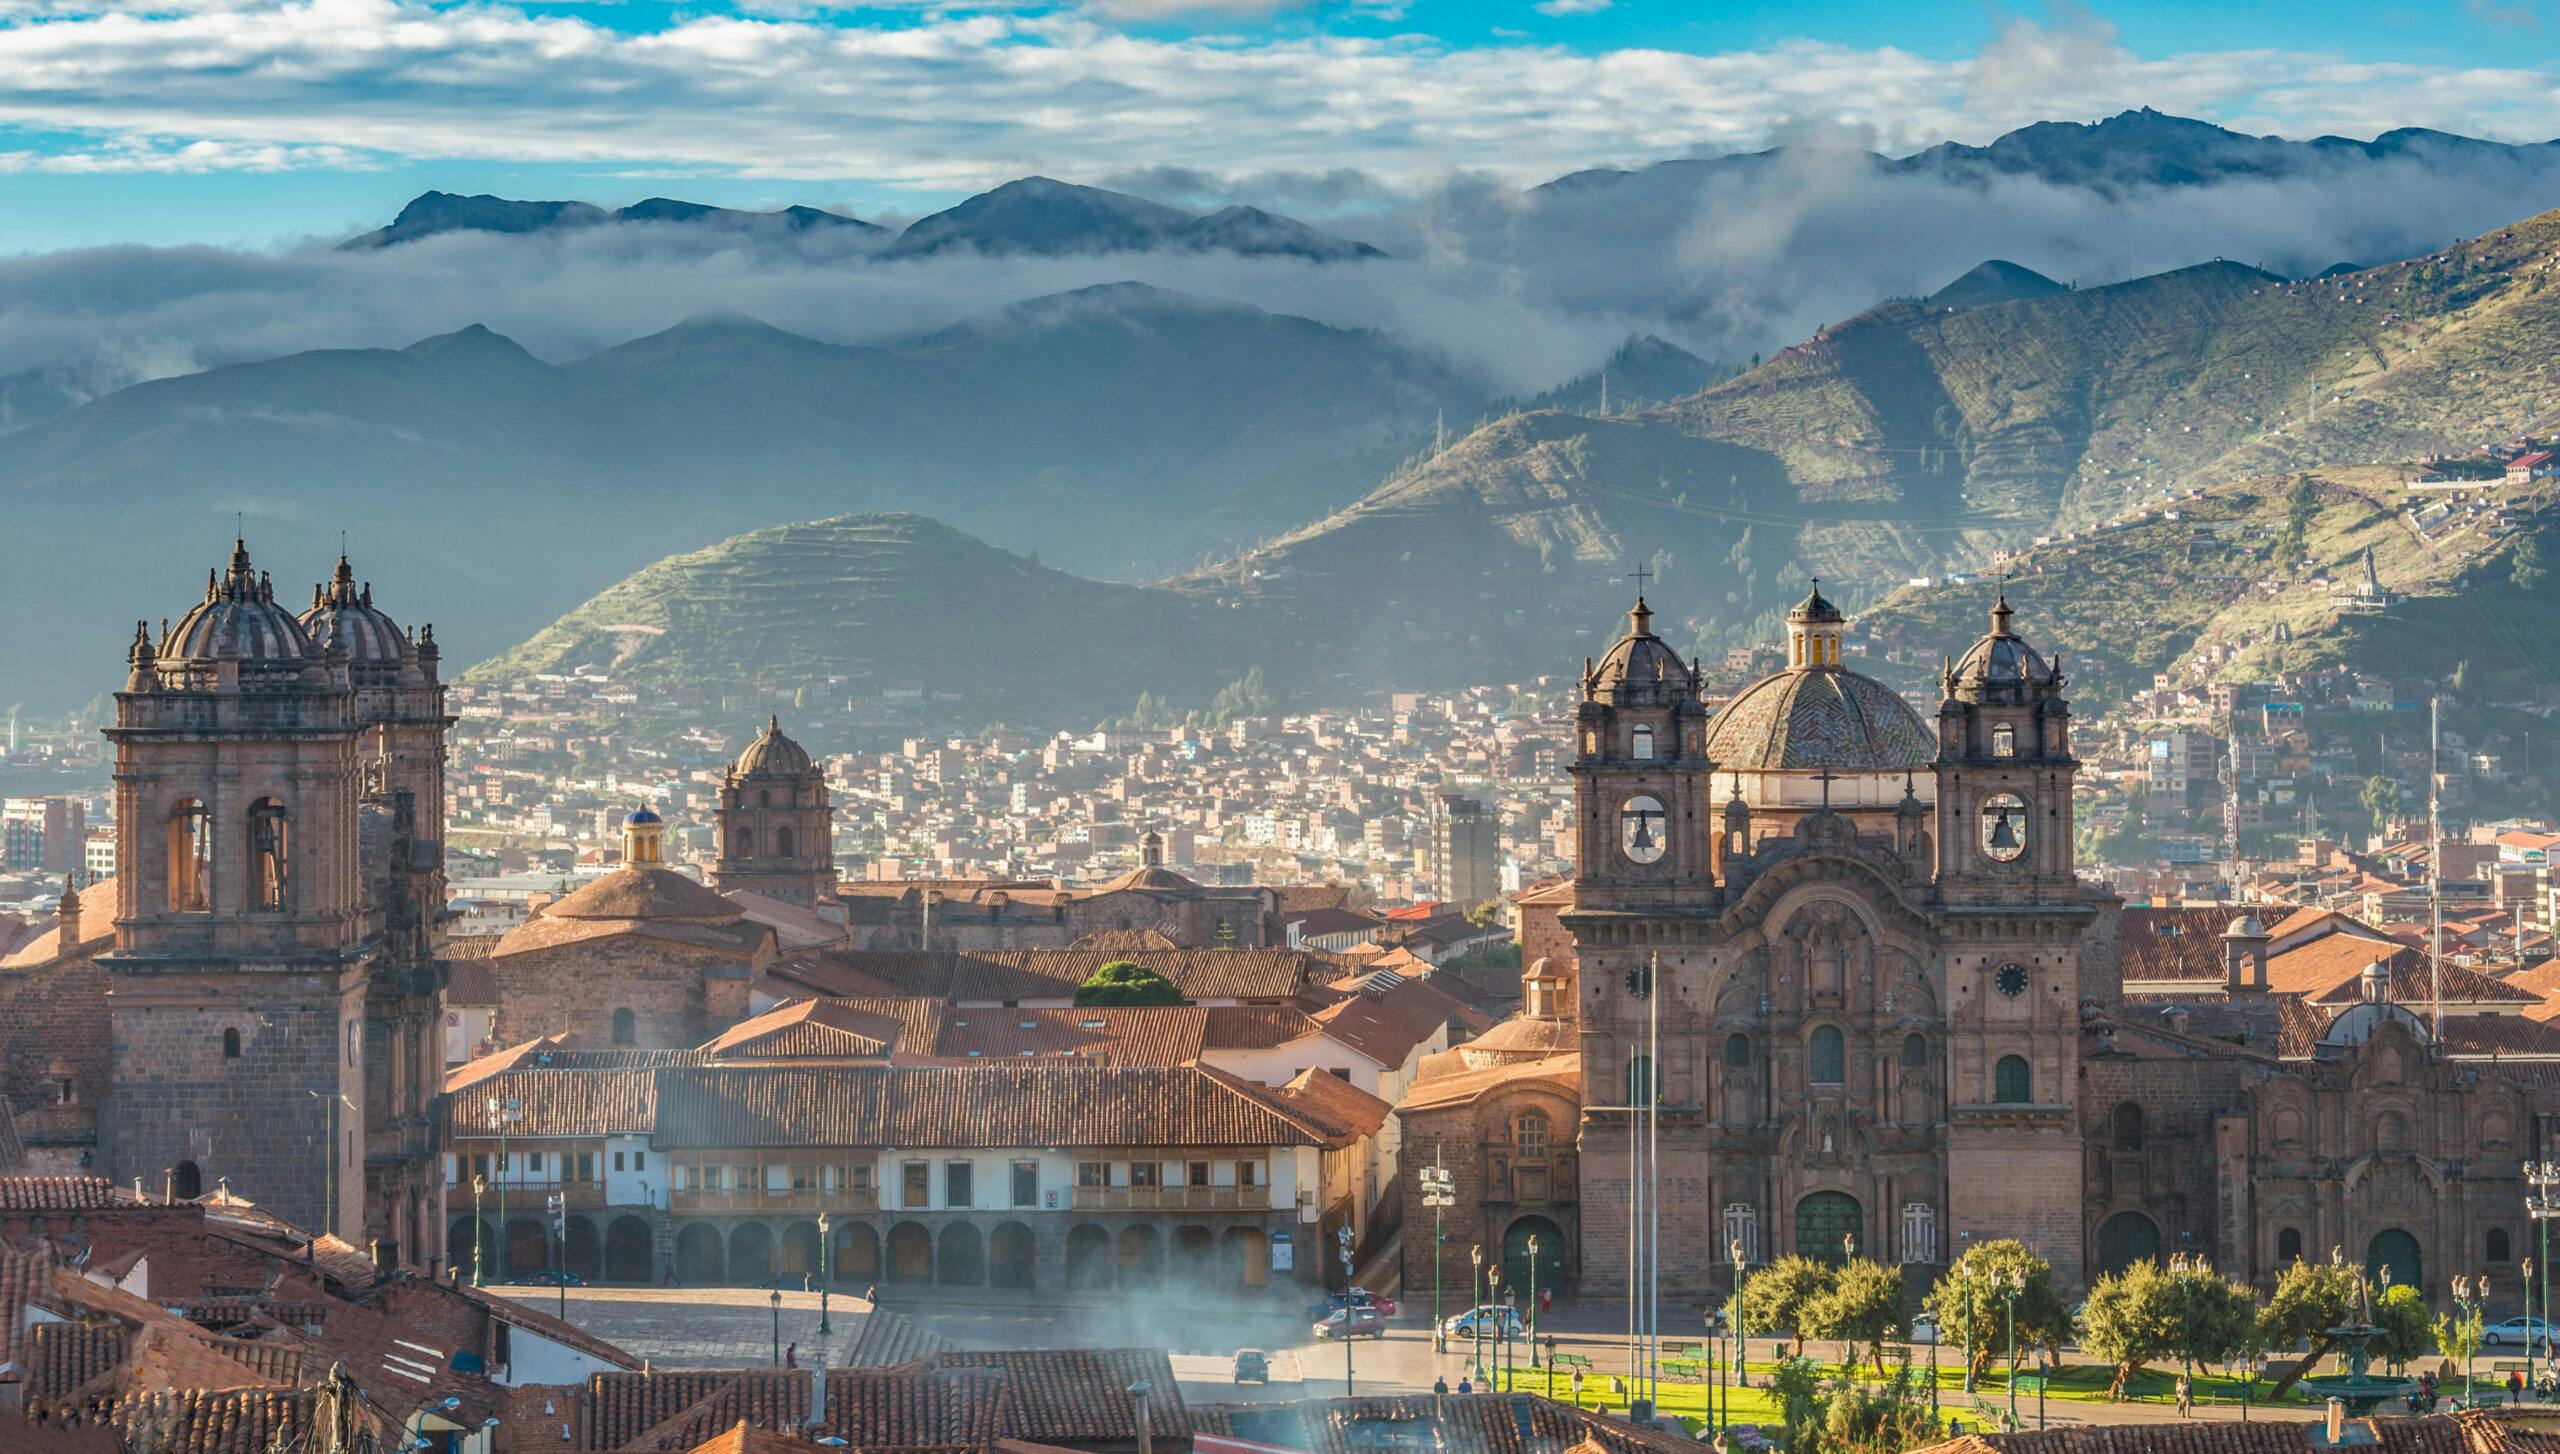 Plaza de armas with Adean Moutain and group of cloud, Cusco, Peru